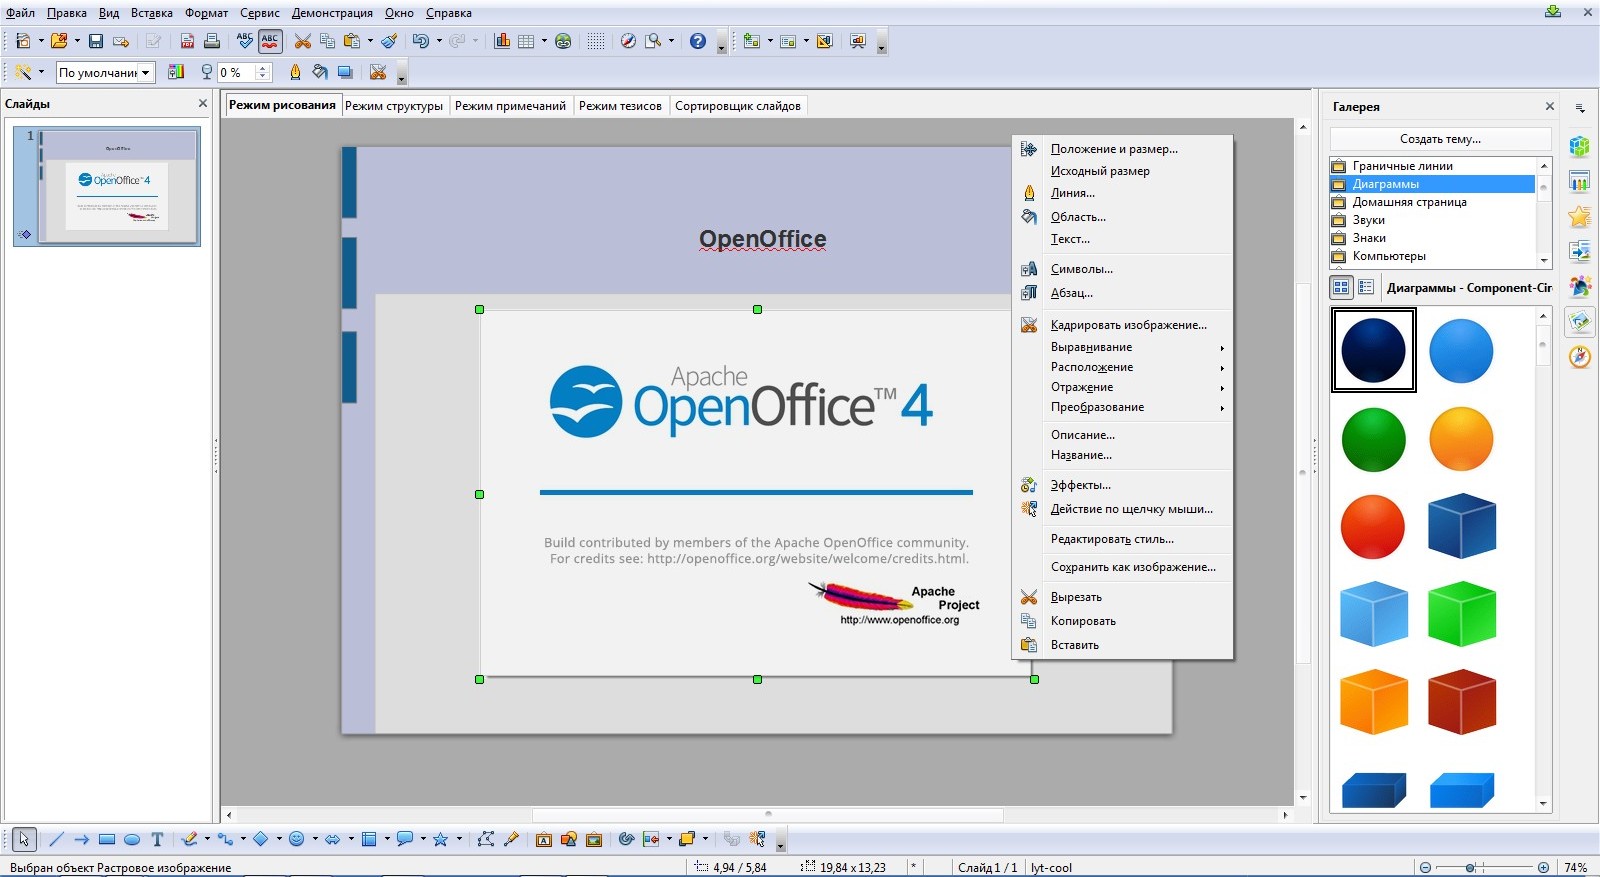 openoffice for windows 10 download